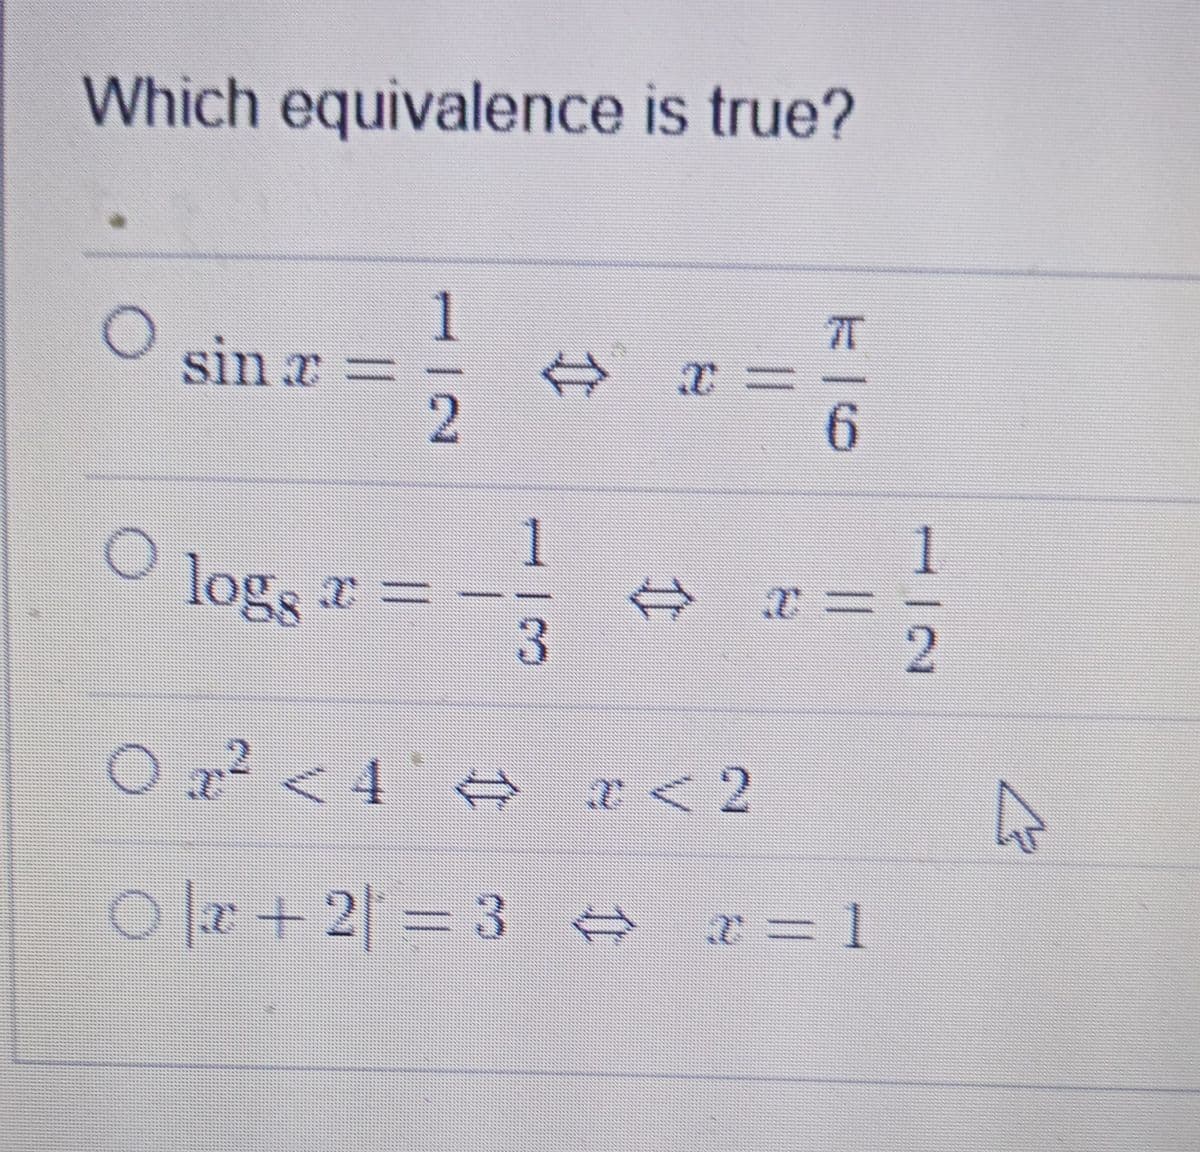 Which equivalence is true?
1
77
sin x
=
6.
1
1
O logs
2
<4.
0a + 2 = 3 A
